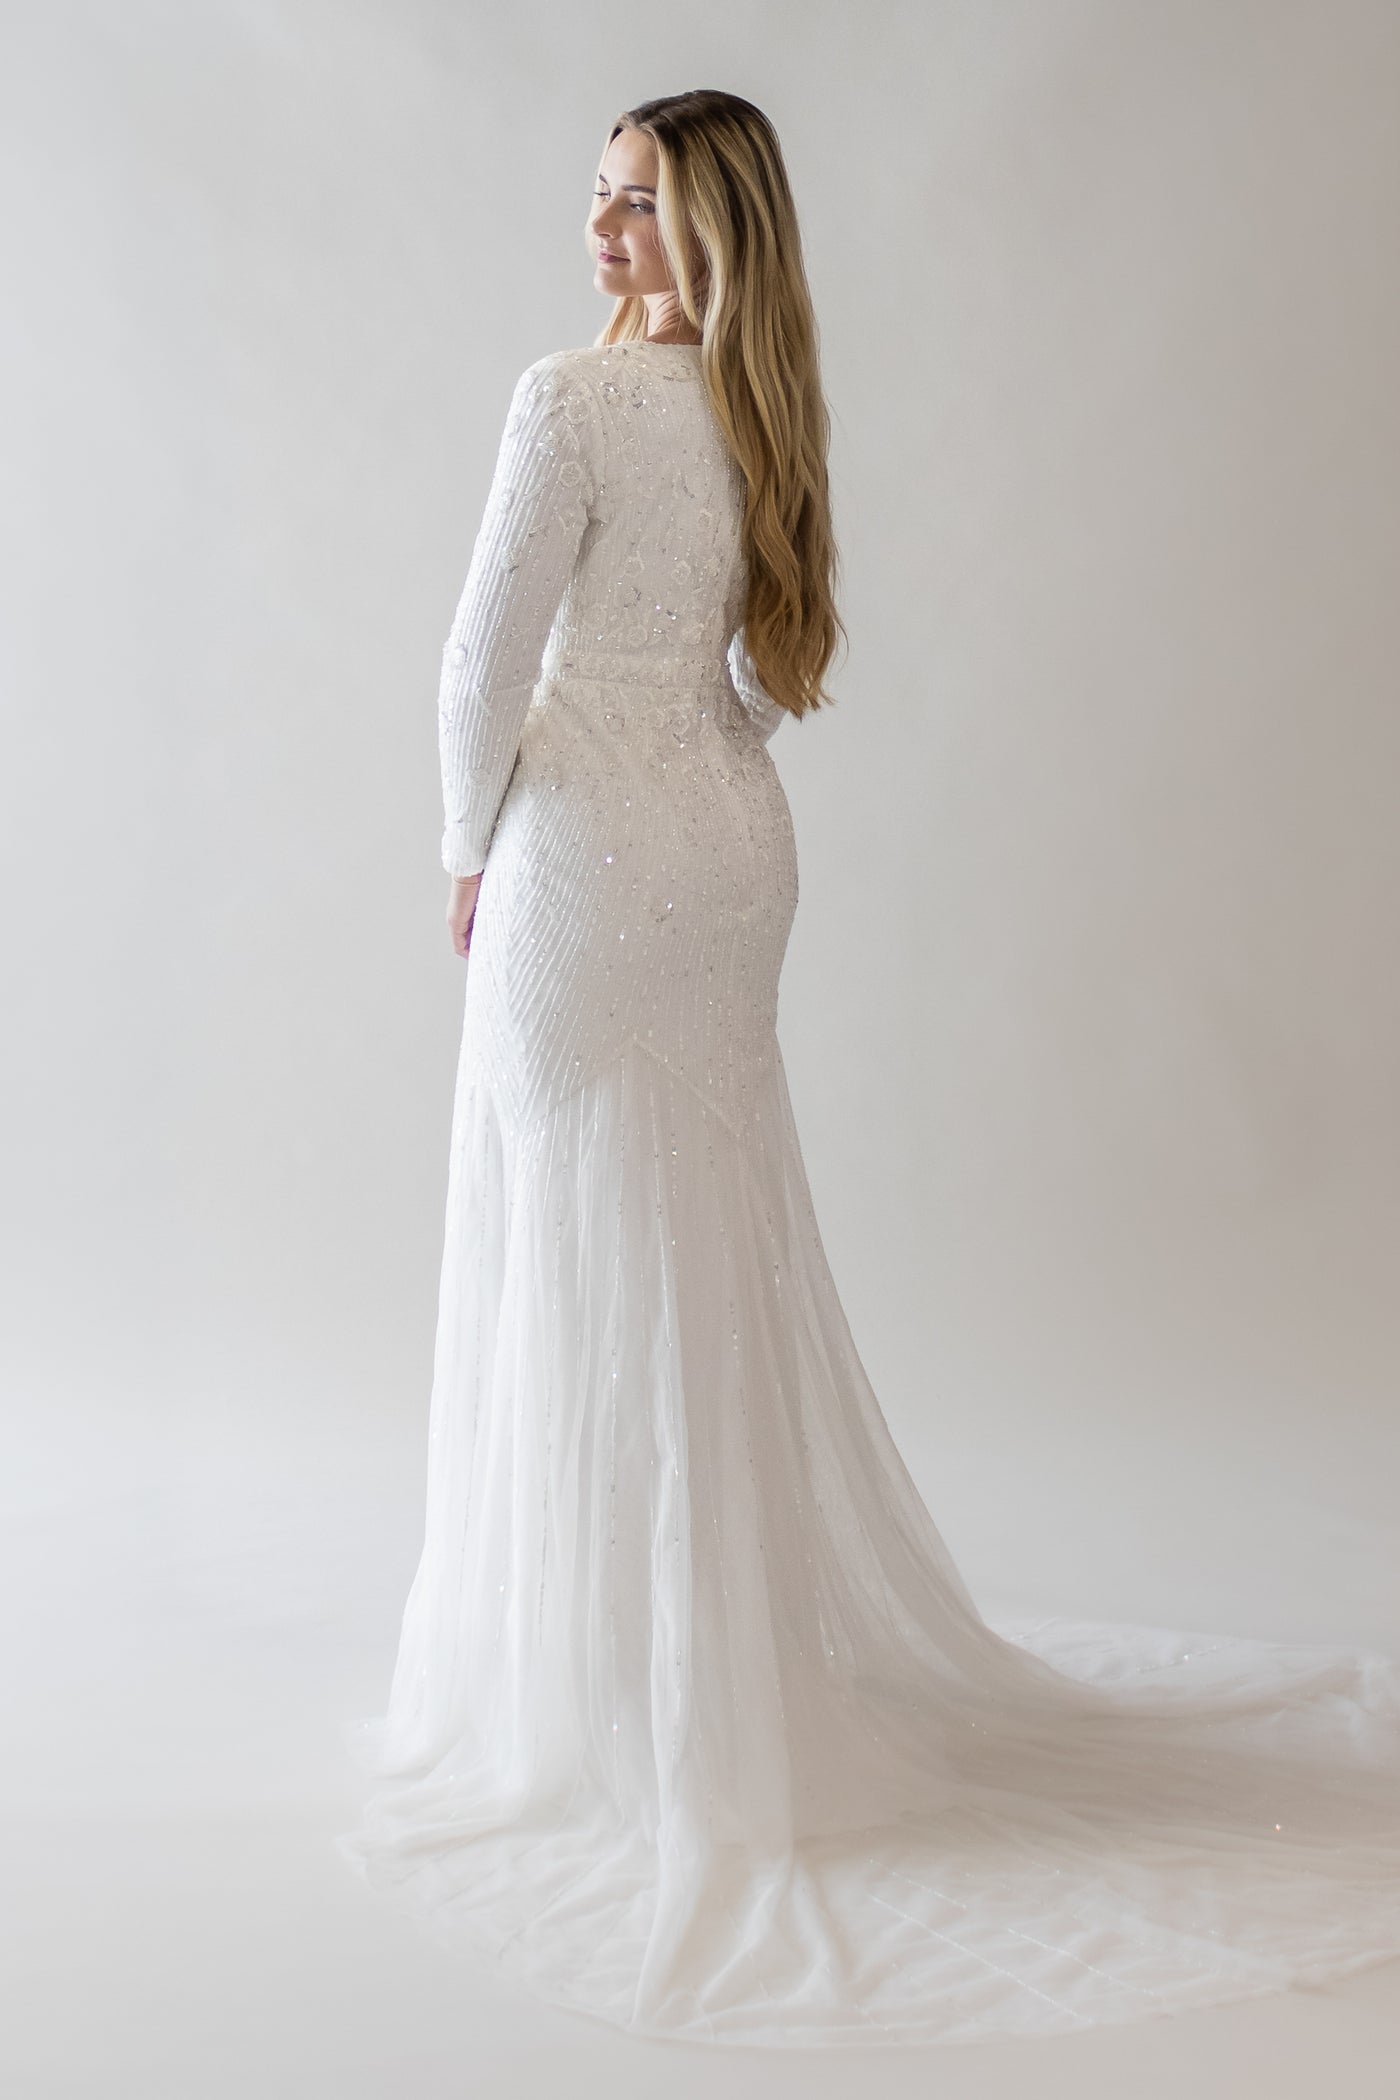 This is a modest wedding gown with a very beaded bodice, mermaid silhouette, and a simple train.